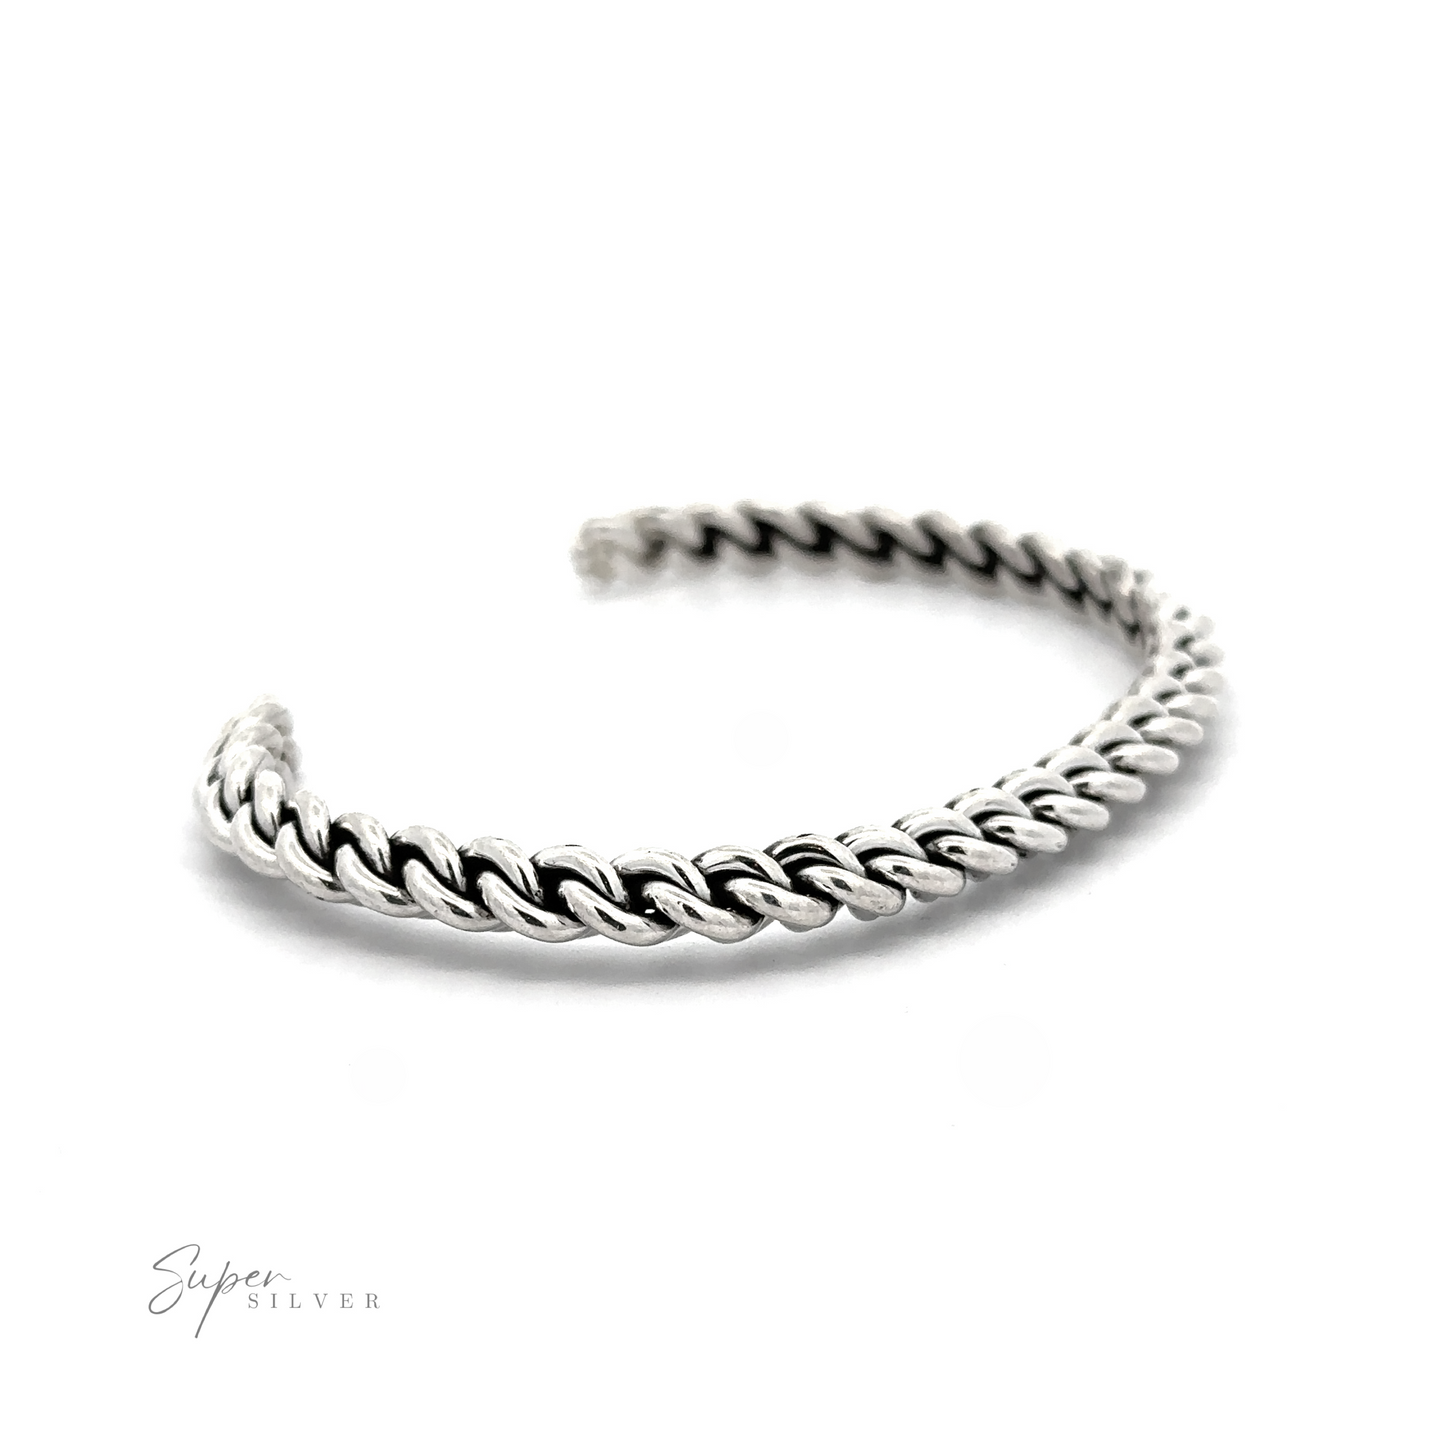 A Native American Handmade Silver Woven Link Bracelet in Sterling Silver with an open end, marked "Super Silver" at the bottom left corner. Perfect for wearing as a stacking bracelet.